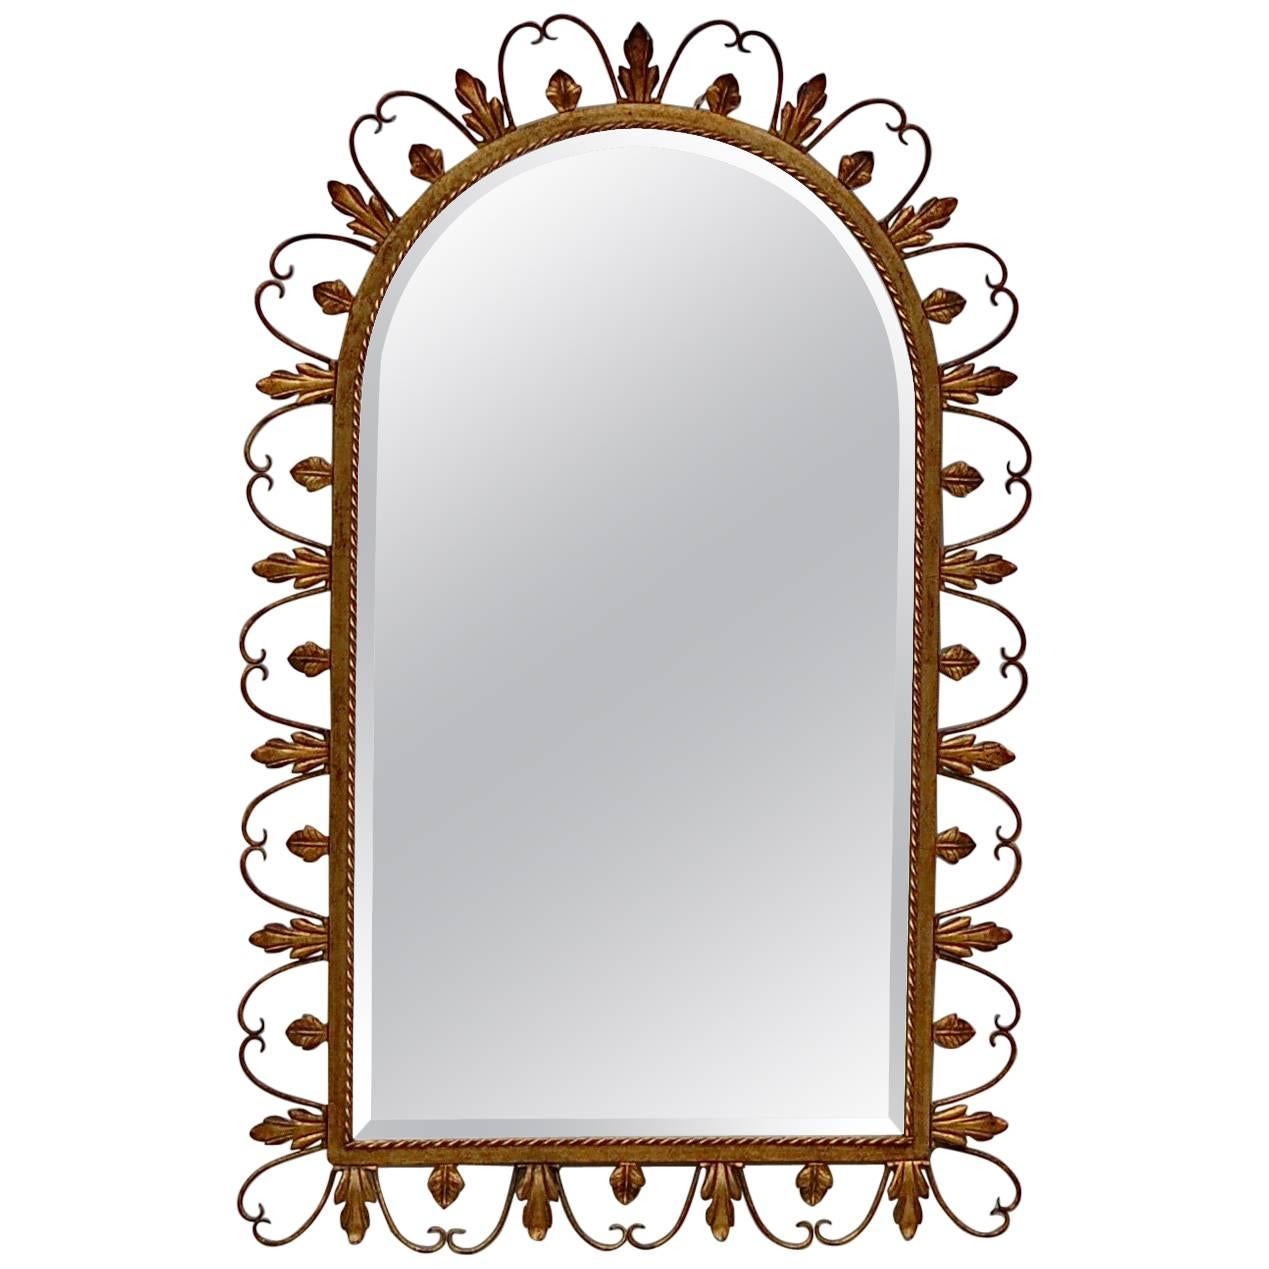 Hollywood Regency Beveled Edge Wall Mirror, circa 1950s For Sale